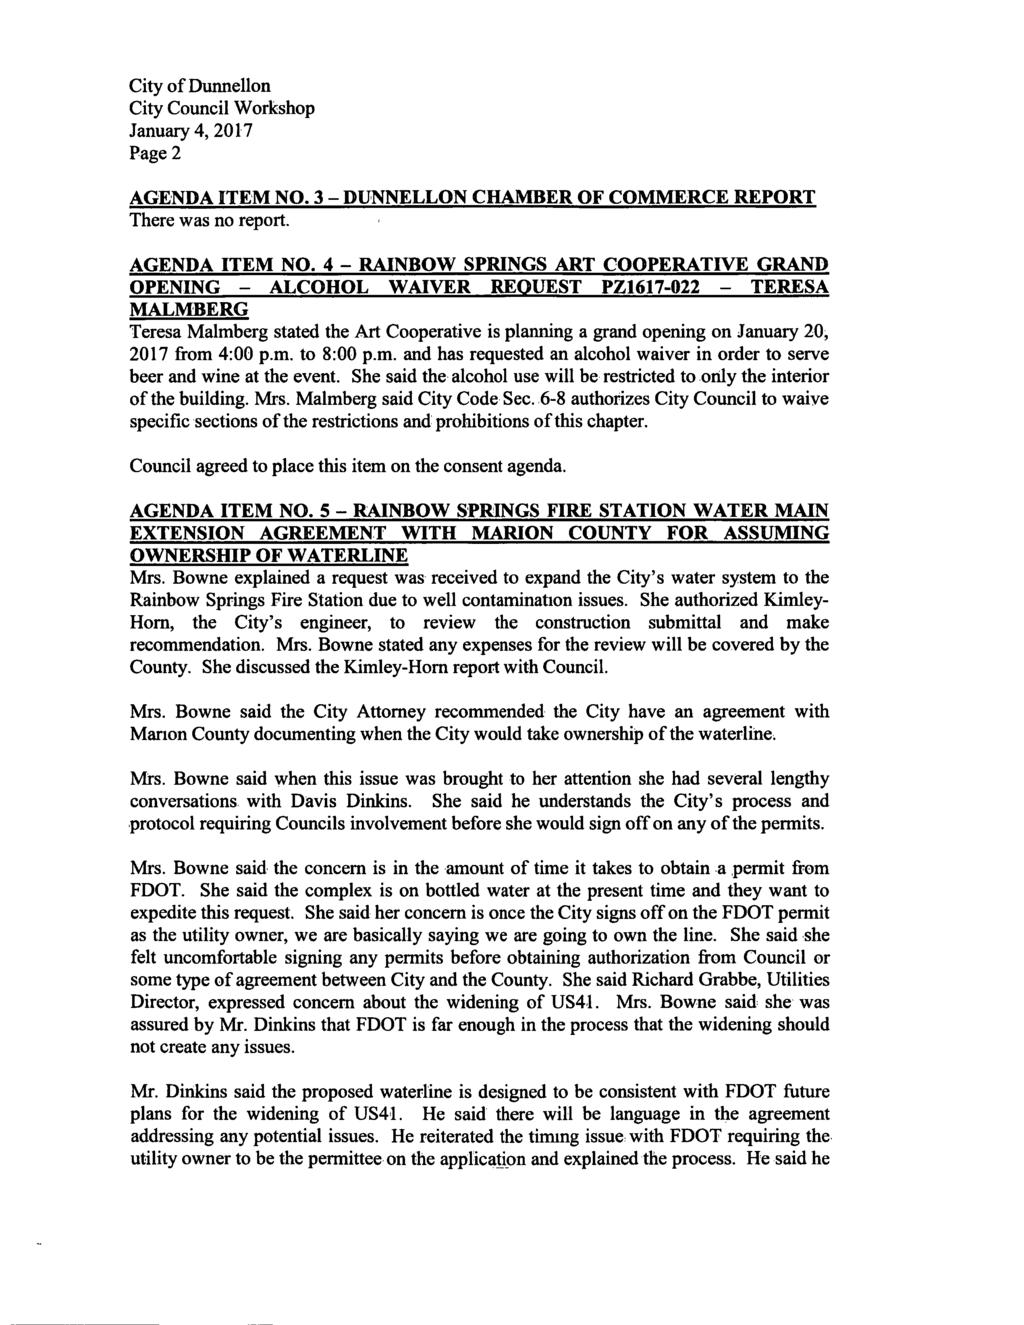 Page 2 AGENDA ITEM NO3 DUNNELLON CHAMBER OF COMMERCE REPORT There was no report AGENDA ITEM NO 4 RAINBOW SPRINGS ART COOPERATIVE GRAND OPENING ALCOHOL WAIVER REQUEST PZ1617022 TERESA MALMBERG Teresa